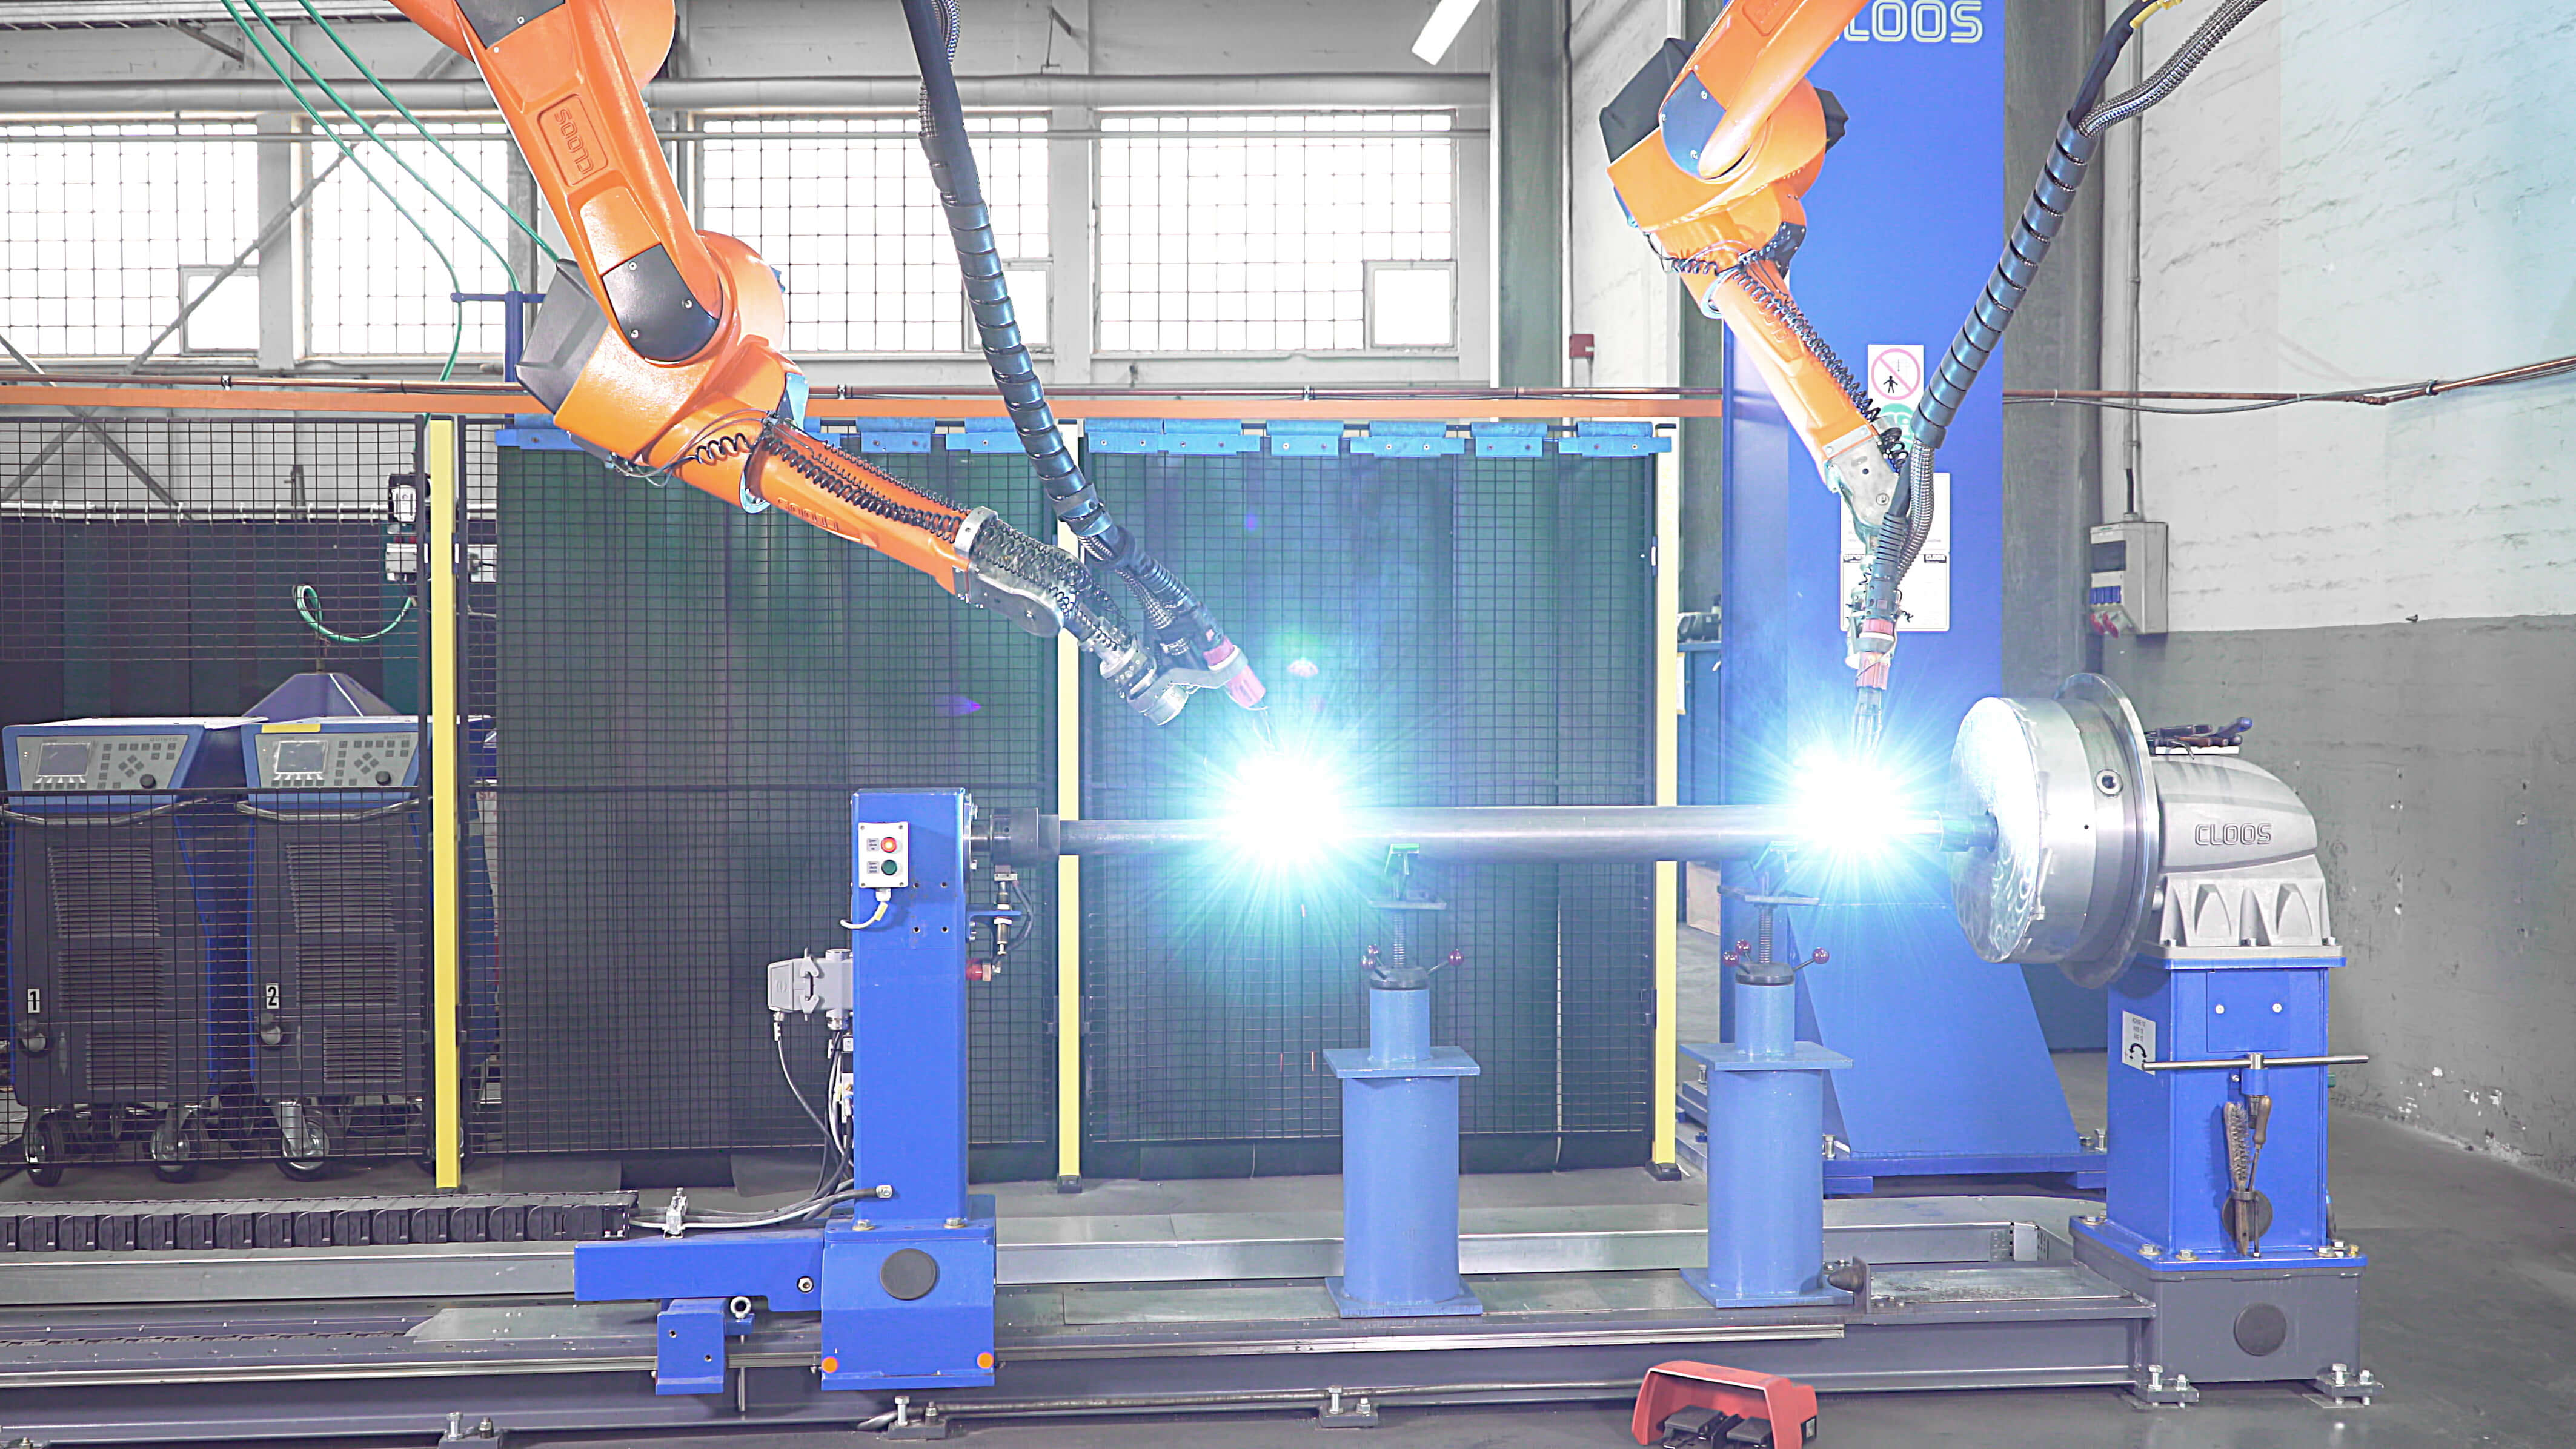 CLOOS robot welding system for efficiency and flexibility at Albert-Frankenthal